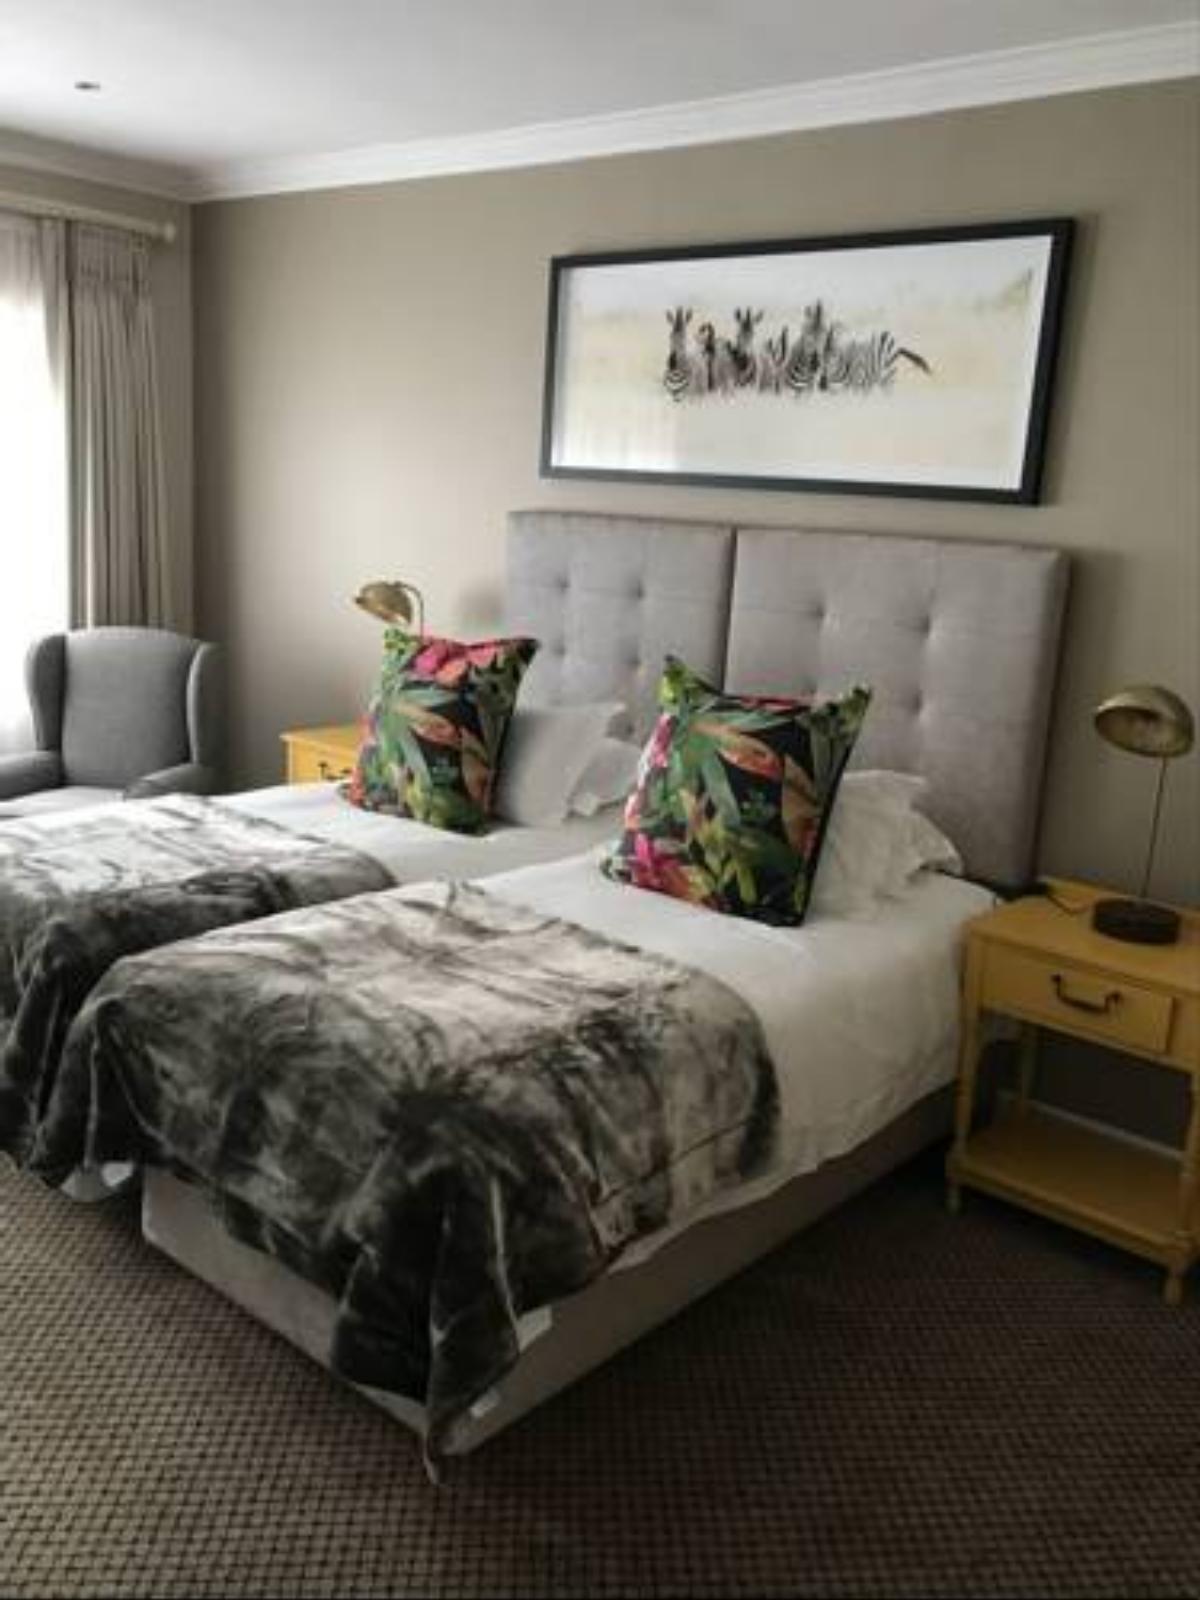 Evertsdal Guesthouse Hotel Durbanville South Africa